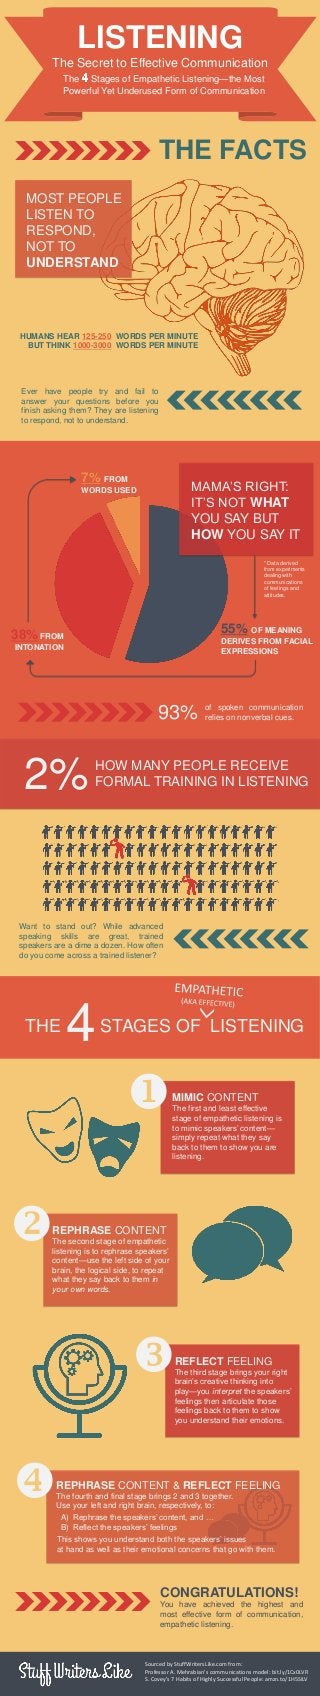 LISTENING
The Secret to Effective Communication
THE FACTS
Ever have people try and fail to
answer your questions before you
finish asking them? They are listening
to respond, not to understand.
The Stages of Empathetic Listening—the Most
Powerful Yet Underused Form of Communication
HUMANS HEAR 125-250 WORDS PER MINUTE
BUT THINK 1000-3000 WORDS PER MINUTE
MOST PEOPLE
LISTEN TO
RESPOND,
NOT TO
UNDERSTAND
55% OF MEANING
DERIVES FROM FACIAL
EXPRESSIONS
MAMA’S RIGHT:
IT’S NOT WHAT
YOU SAY BUT
HOW YOU SAY IT
38% FROM
INTONATION
7% FROM
WORDS USED
HOW MANY PEOPLE RECEIVE
FORMAL TRAINING IN LISTENING2%
THE STAGES OF LISTENING
4
MIMIC CONTENT
The first and least effective
stage of empathetic listening is
to mimic speakers’ content—
simply repeat what they say
back to them to show you are
listening.
u
REPHRASE CONTENT & REFLECT FEELING
x
REPHRASE CONTENT
The second stage of empathetic
listening is to rephrase speakers’
content—use the left side of your
brain, the logical side, to repeat
what they say back to them in
your own words.
v
REFLECT FEELING
The third stage brings your right
brain’s creative thinking into
play—you interpret the speakers’
feelings then articulate those
feelings back to them to show
you understand their emotions.
w
CONGRATULATIONS!
You have achieved the highest and
most effective form of communication,
empathetic listening.
Want to stand out? While advanced
speaking skills are great, trained
speakers are a dime a dozen. How often
do you come across a trained listener?
of spoken communication
relies on nonverbal cues.93%
The fourth and final stage brings 2 and 3 together.
Use your left and right brain, respectively, to:
This shows you understand both the speakers’ issues
at hand as well as their emotional concerns that go with them.
A) Rephrase the speakers’ content, and …
B) Reflect the speakers’ feelings
Sourced by StuffWritersLike.com from:
Professor A. Mehrabian's communications model: bit.ly/1Cx0LVR
S. Covey's 7 Habits of Highly Successful People: amzn.to/1H5SiLV
* Data derived
from experiments
dealing with
communications
of feelings and
attitudes.
 